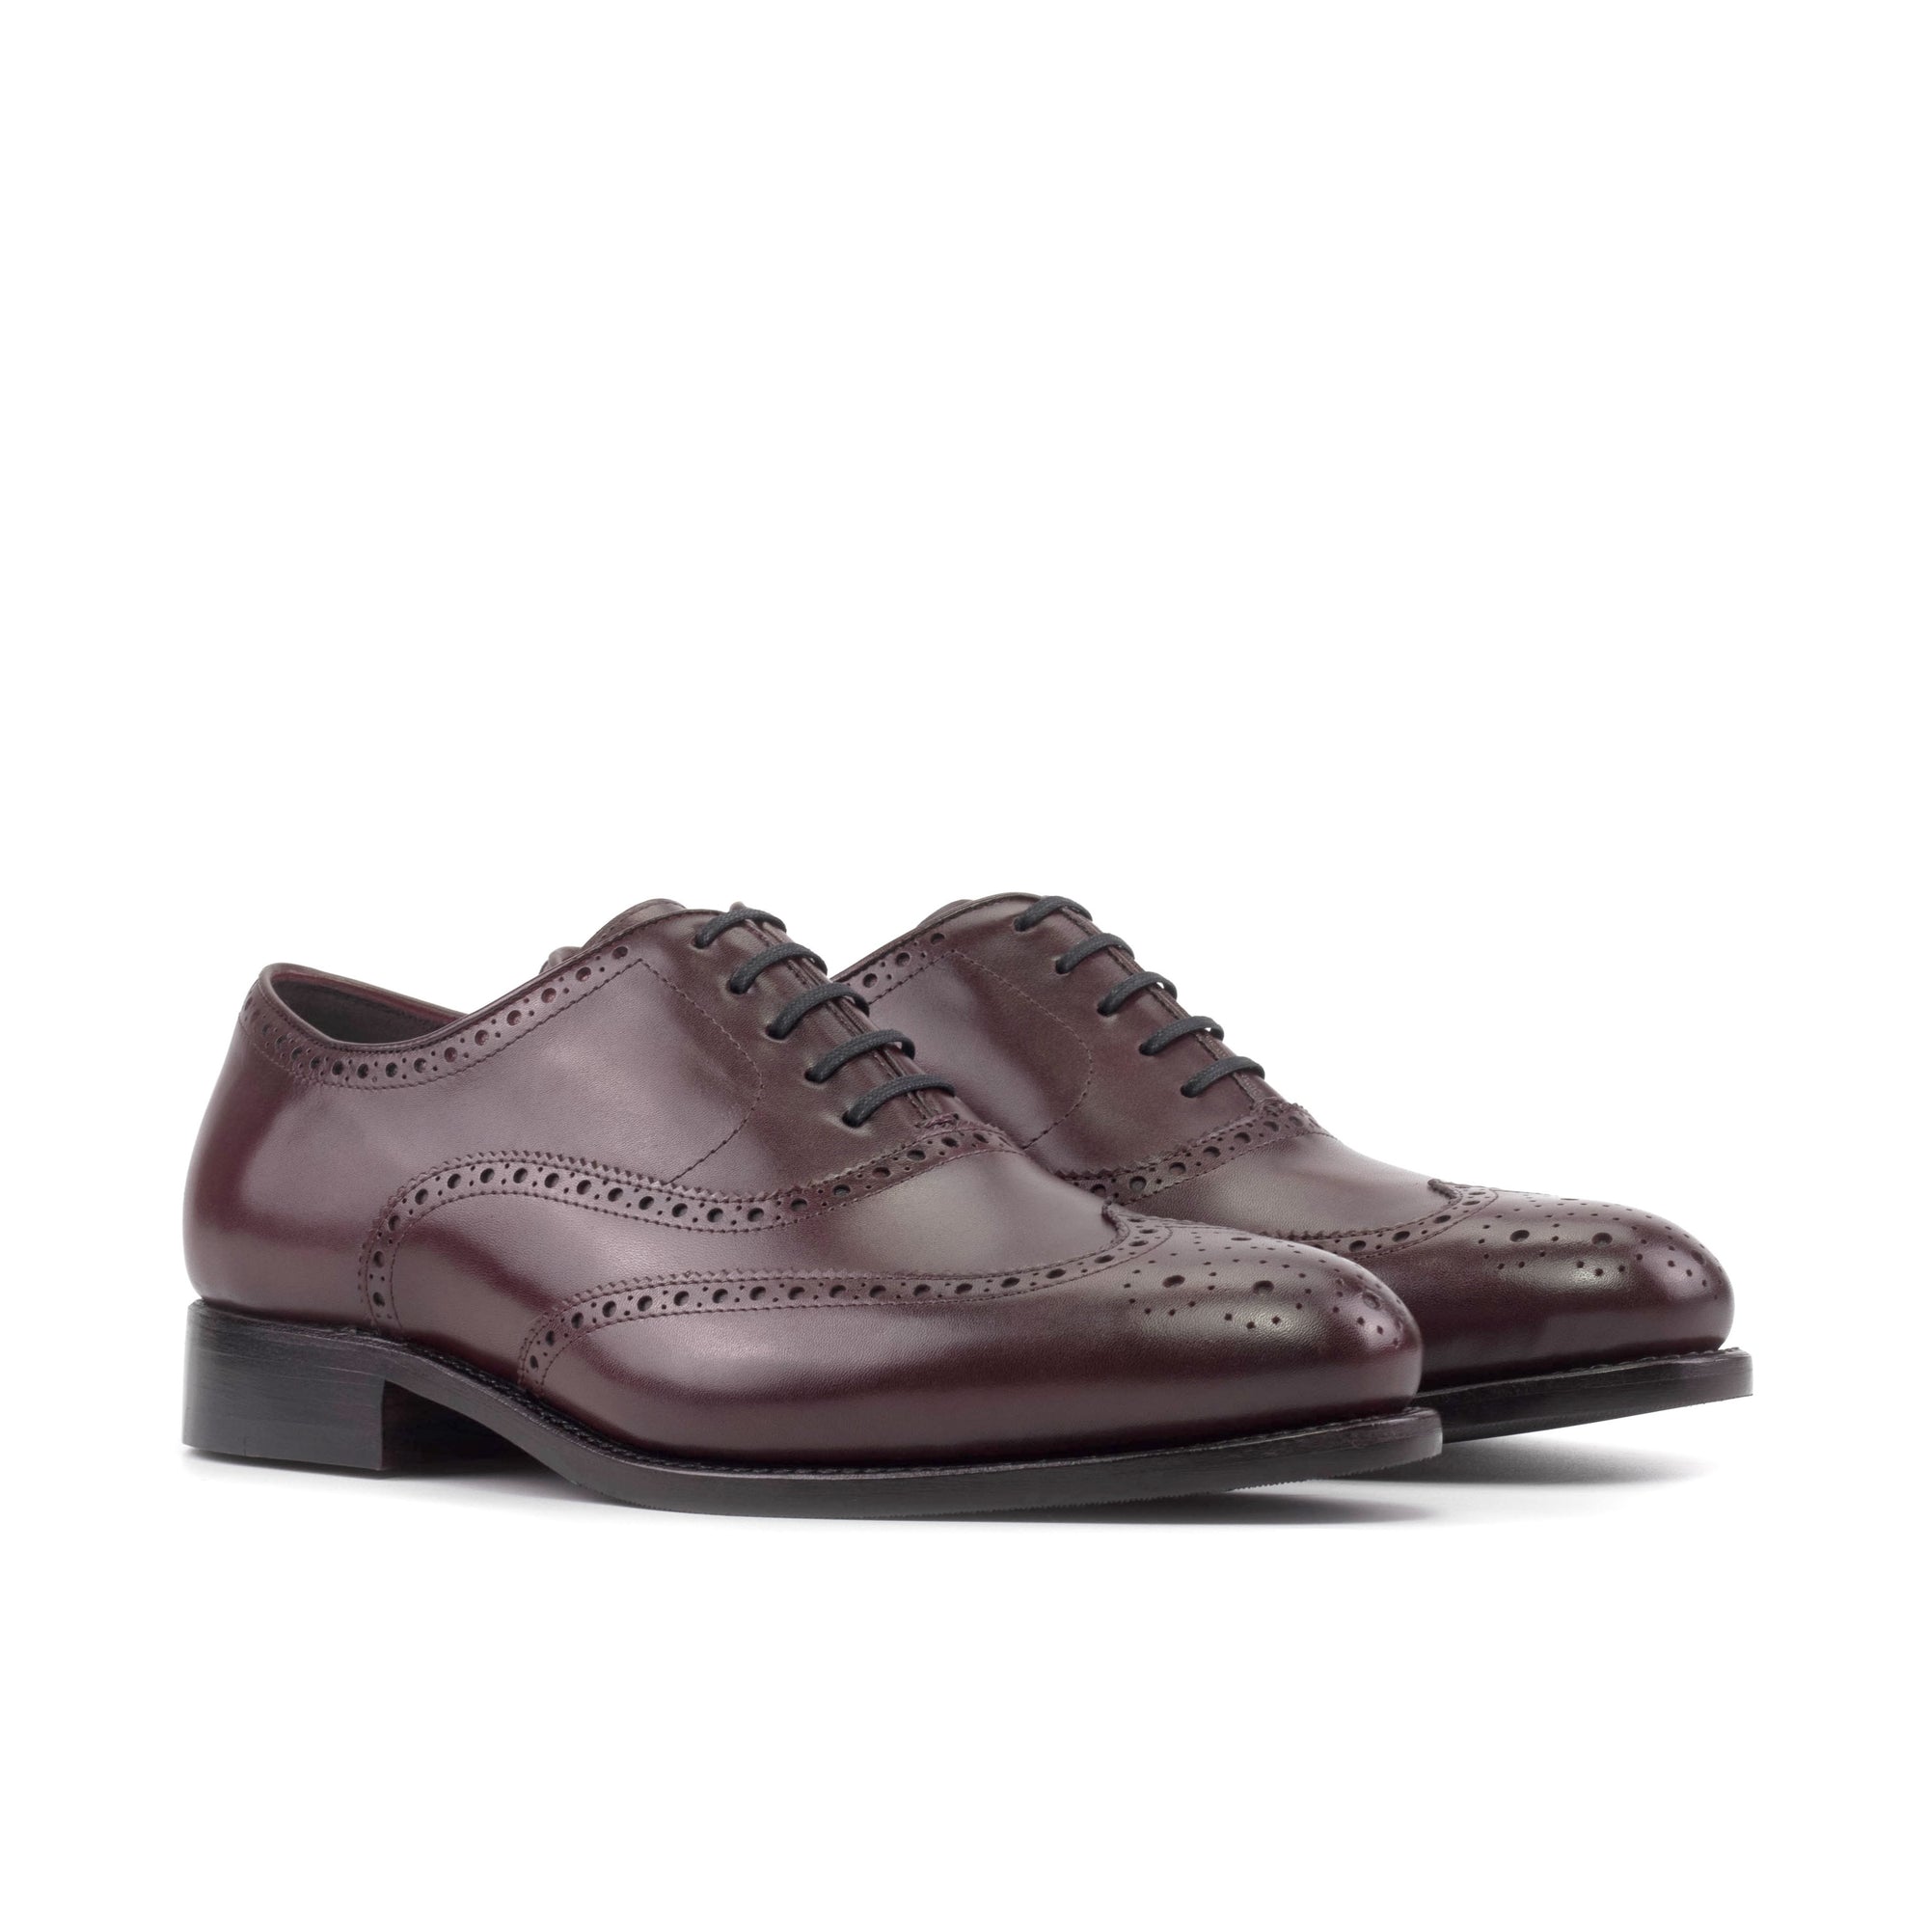 Burgundy Wine Oxblood Colour Box Calf Leather Goodyear Welted Wingtip Oxford Brogue Dress Shoes